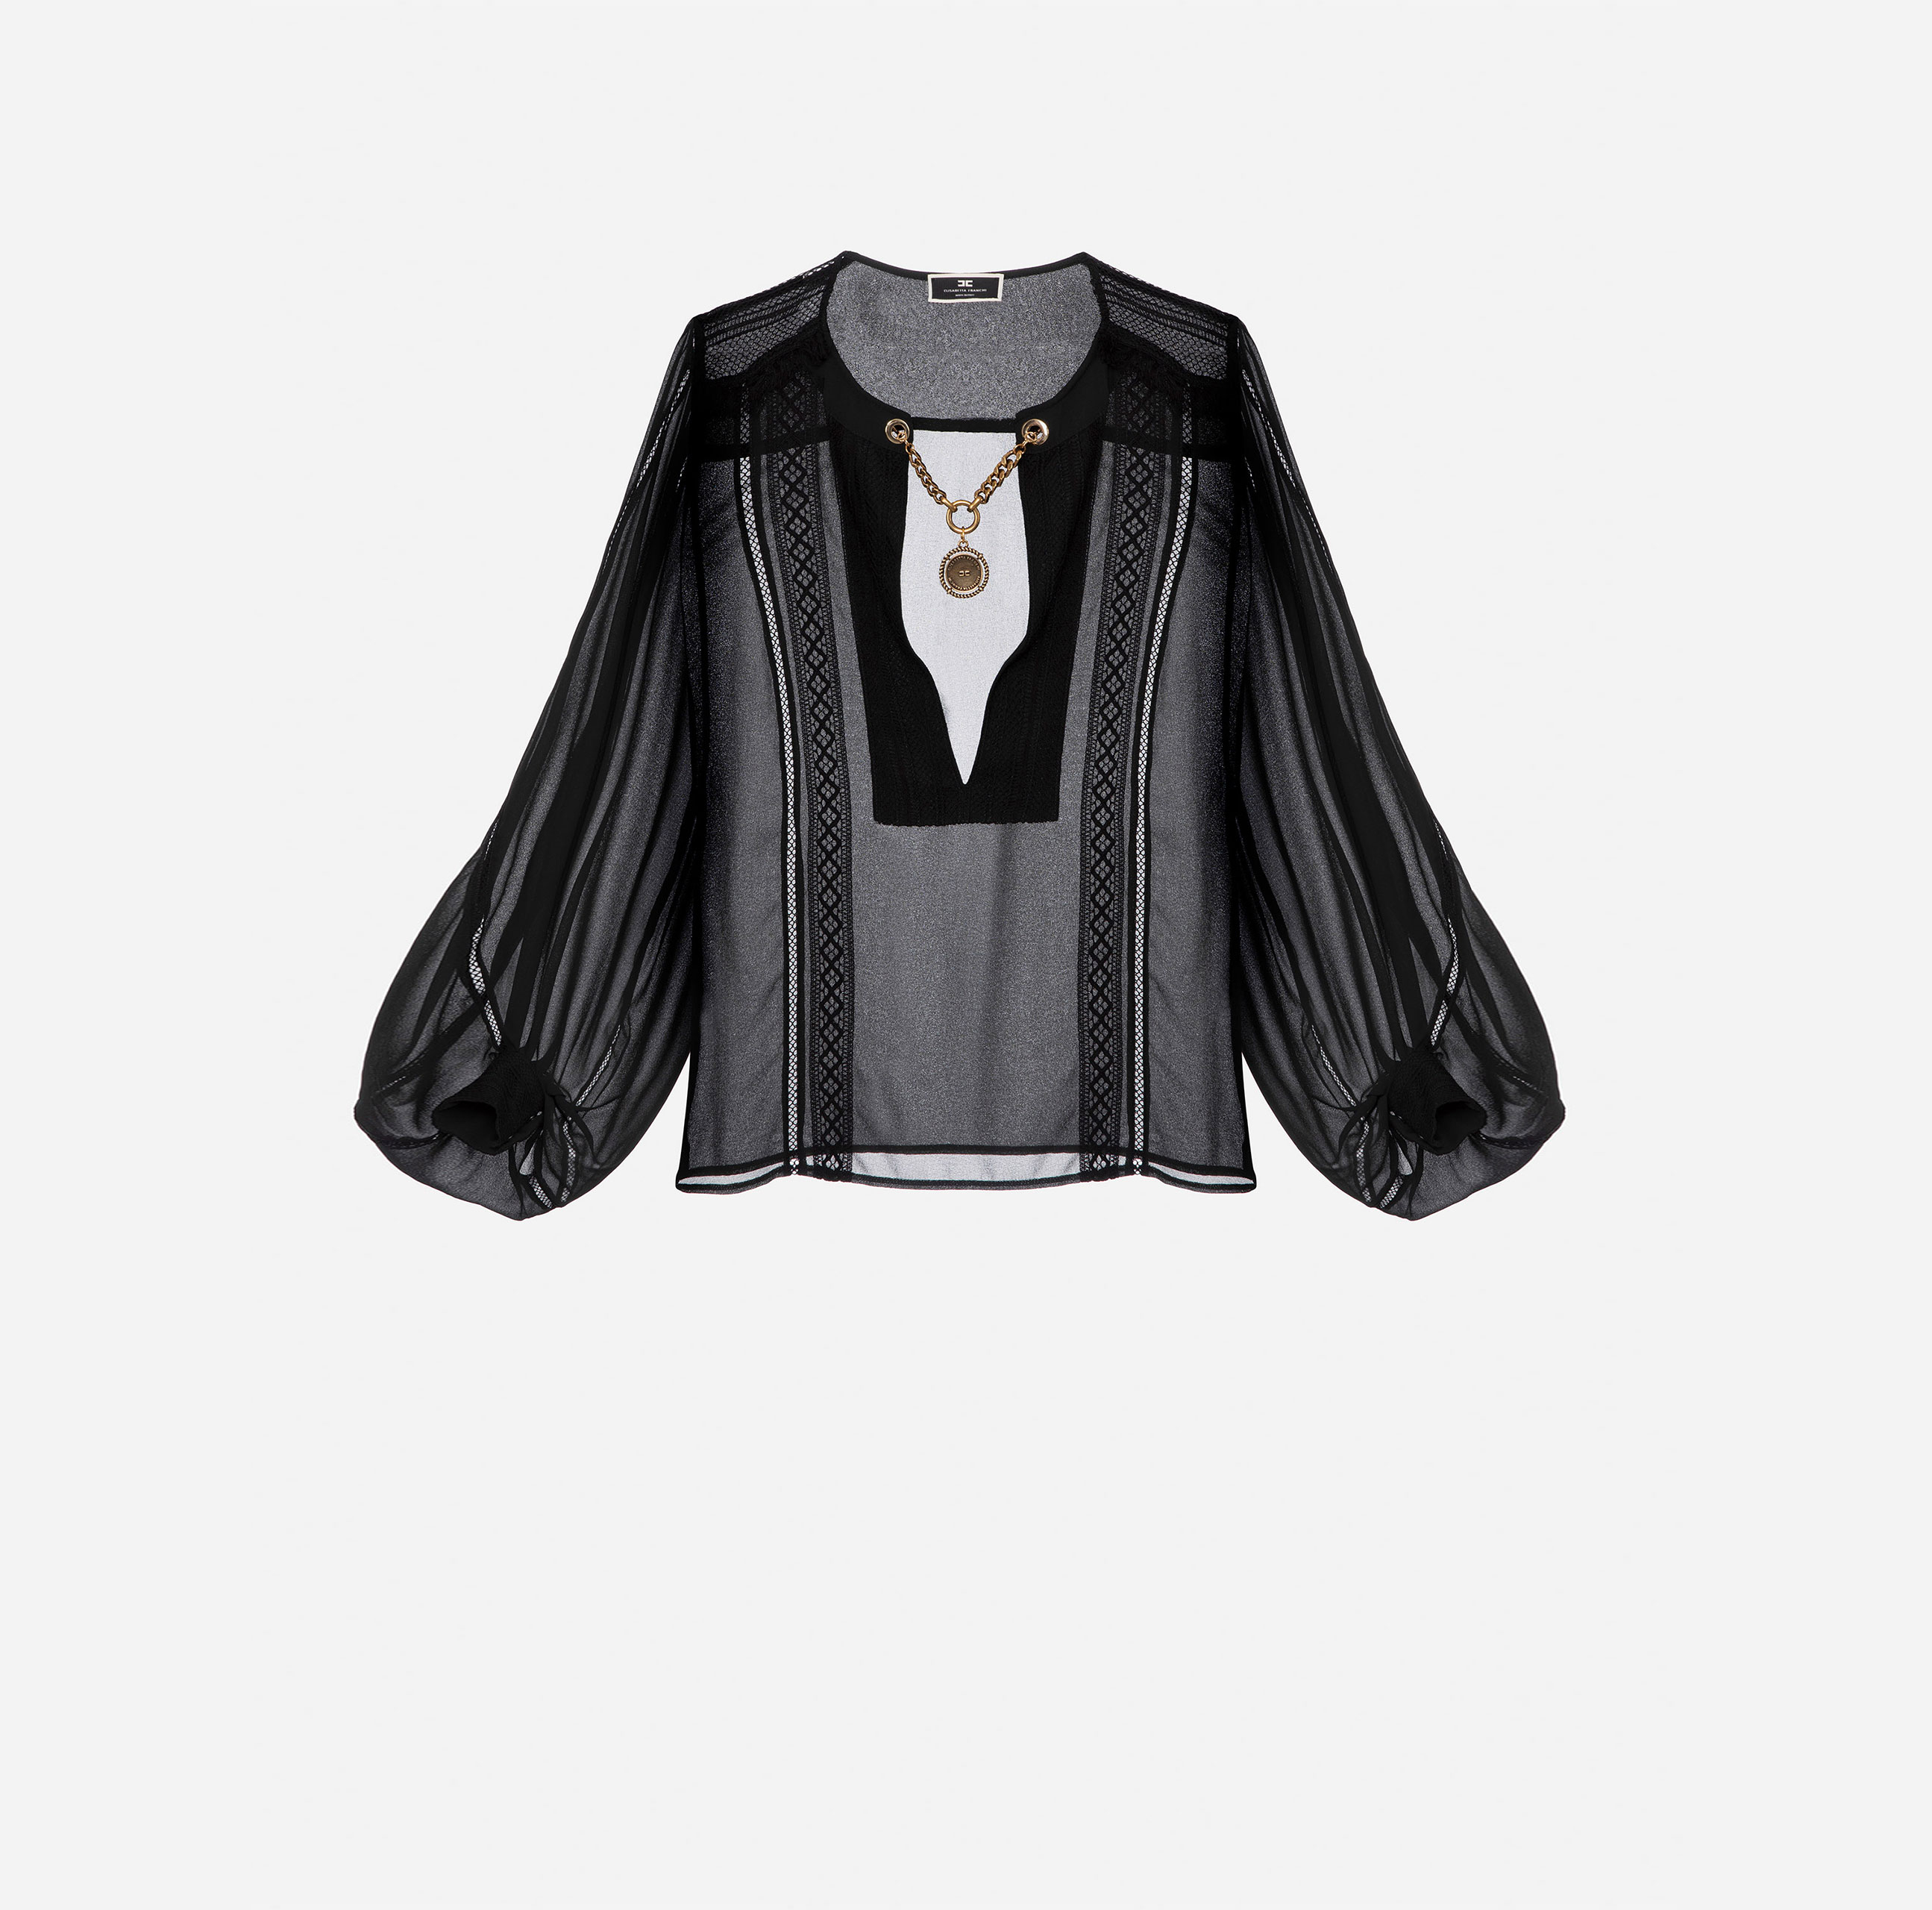 Blouse with ascot tie and lace inserts - Elisabetta Franchi